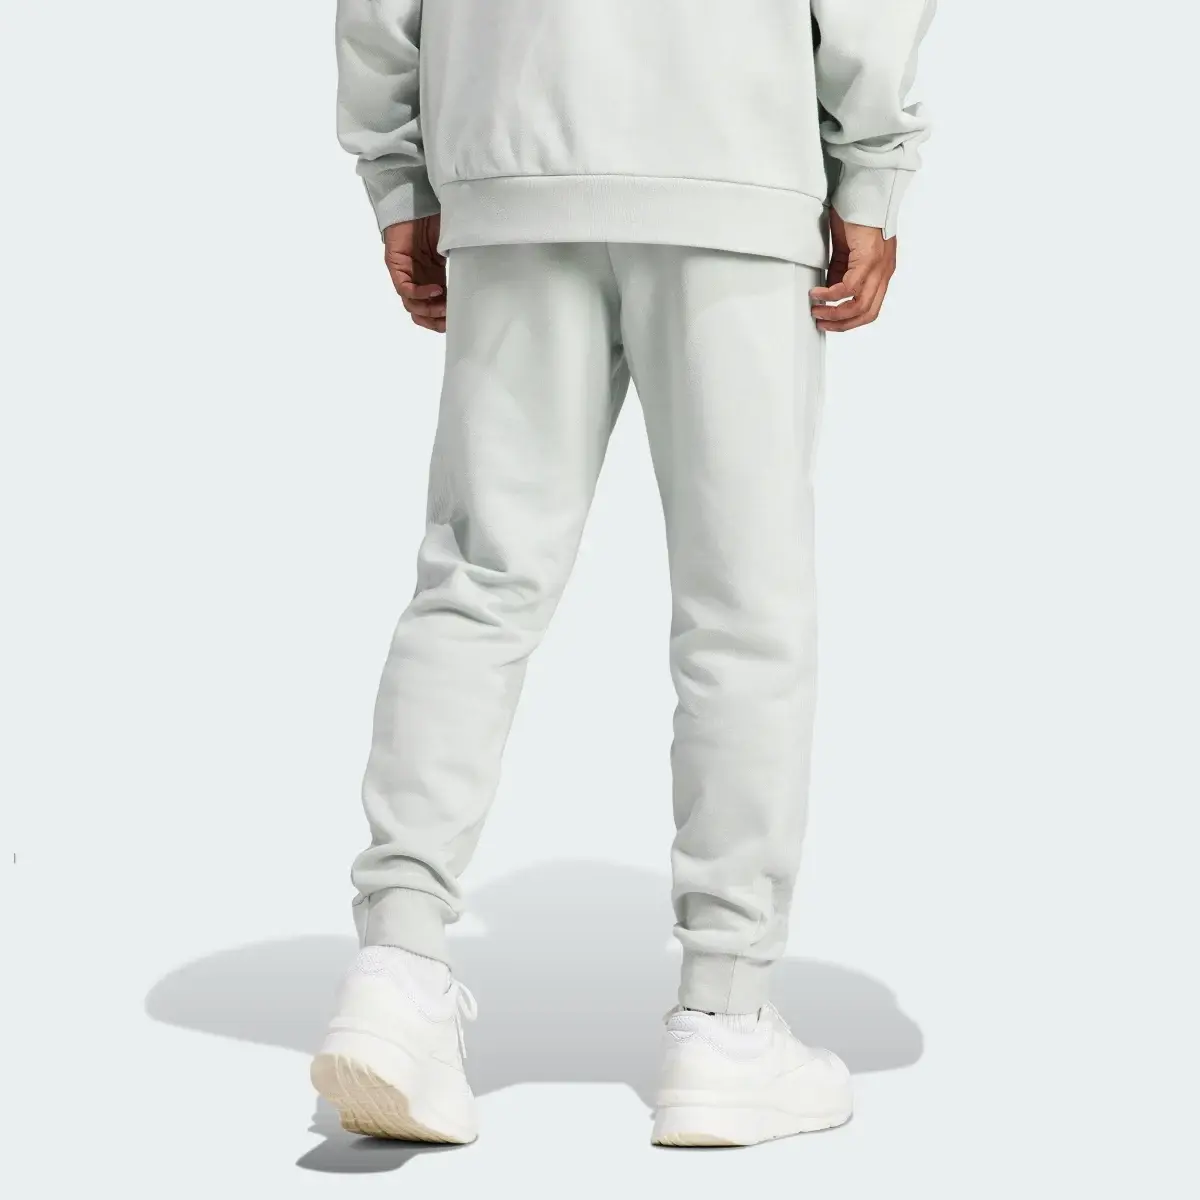 Adidas Lounge French Terry Pants. 3